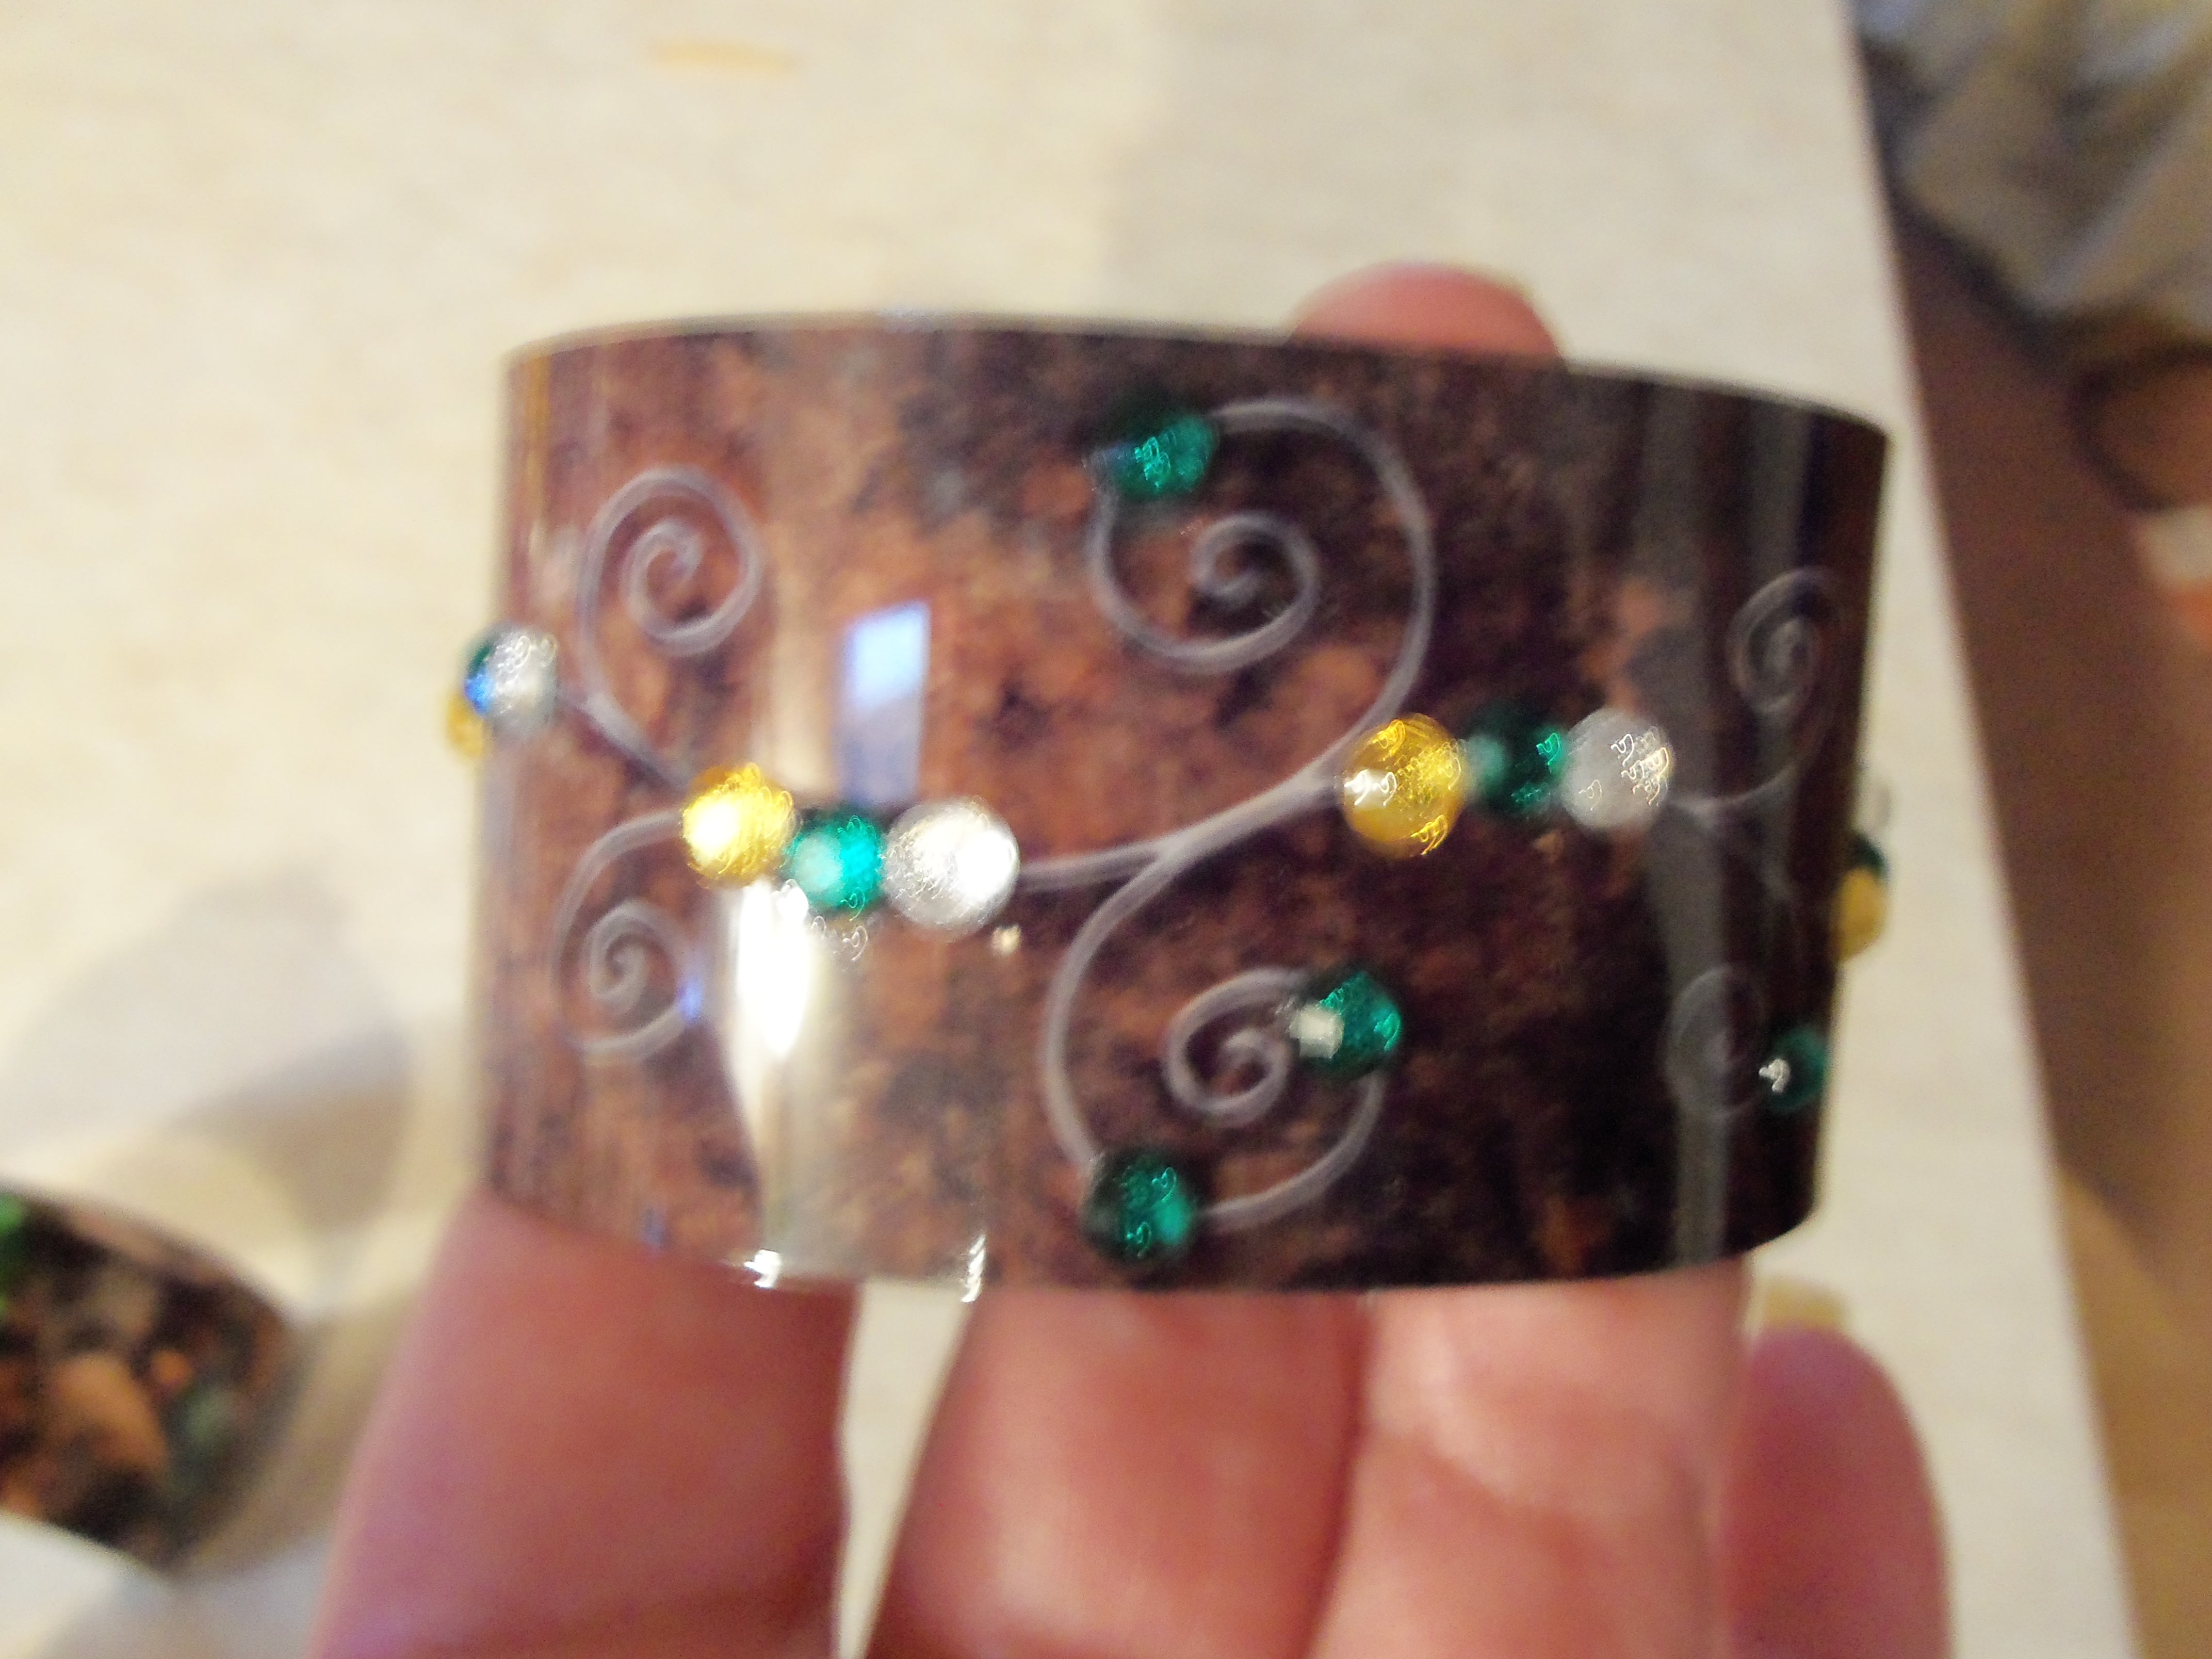 cuff bracelets made with sublimation printing